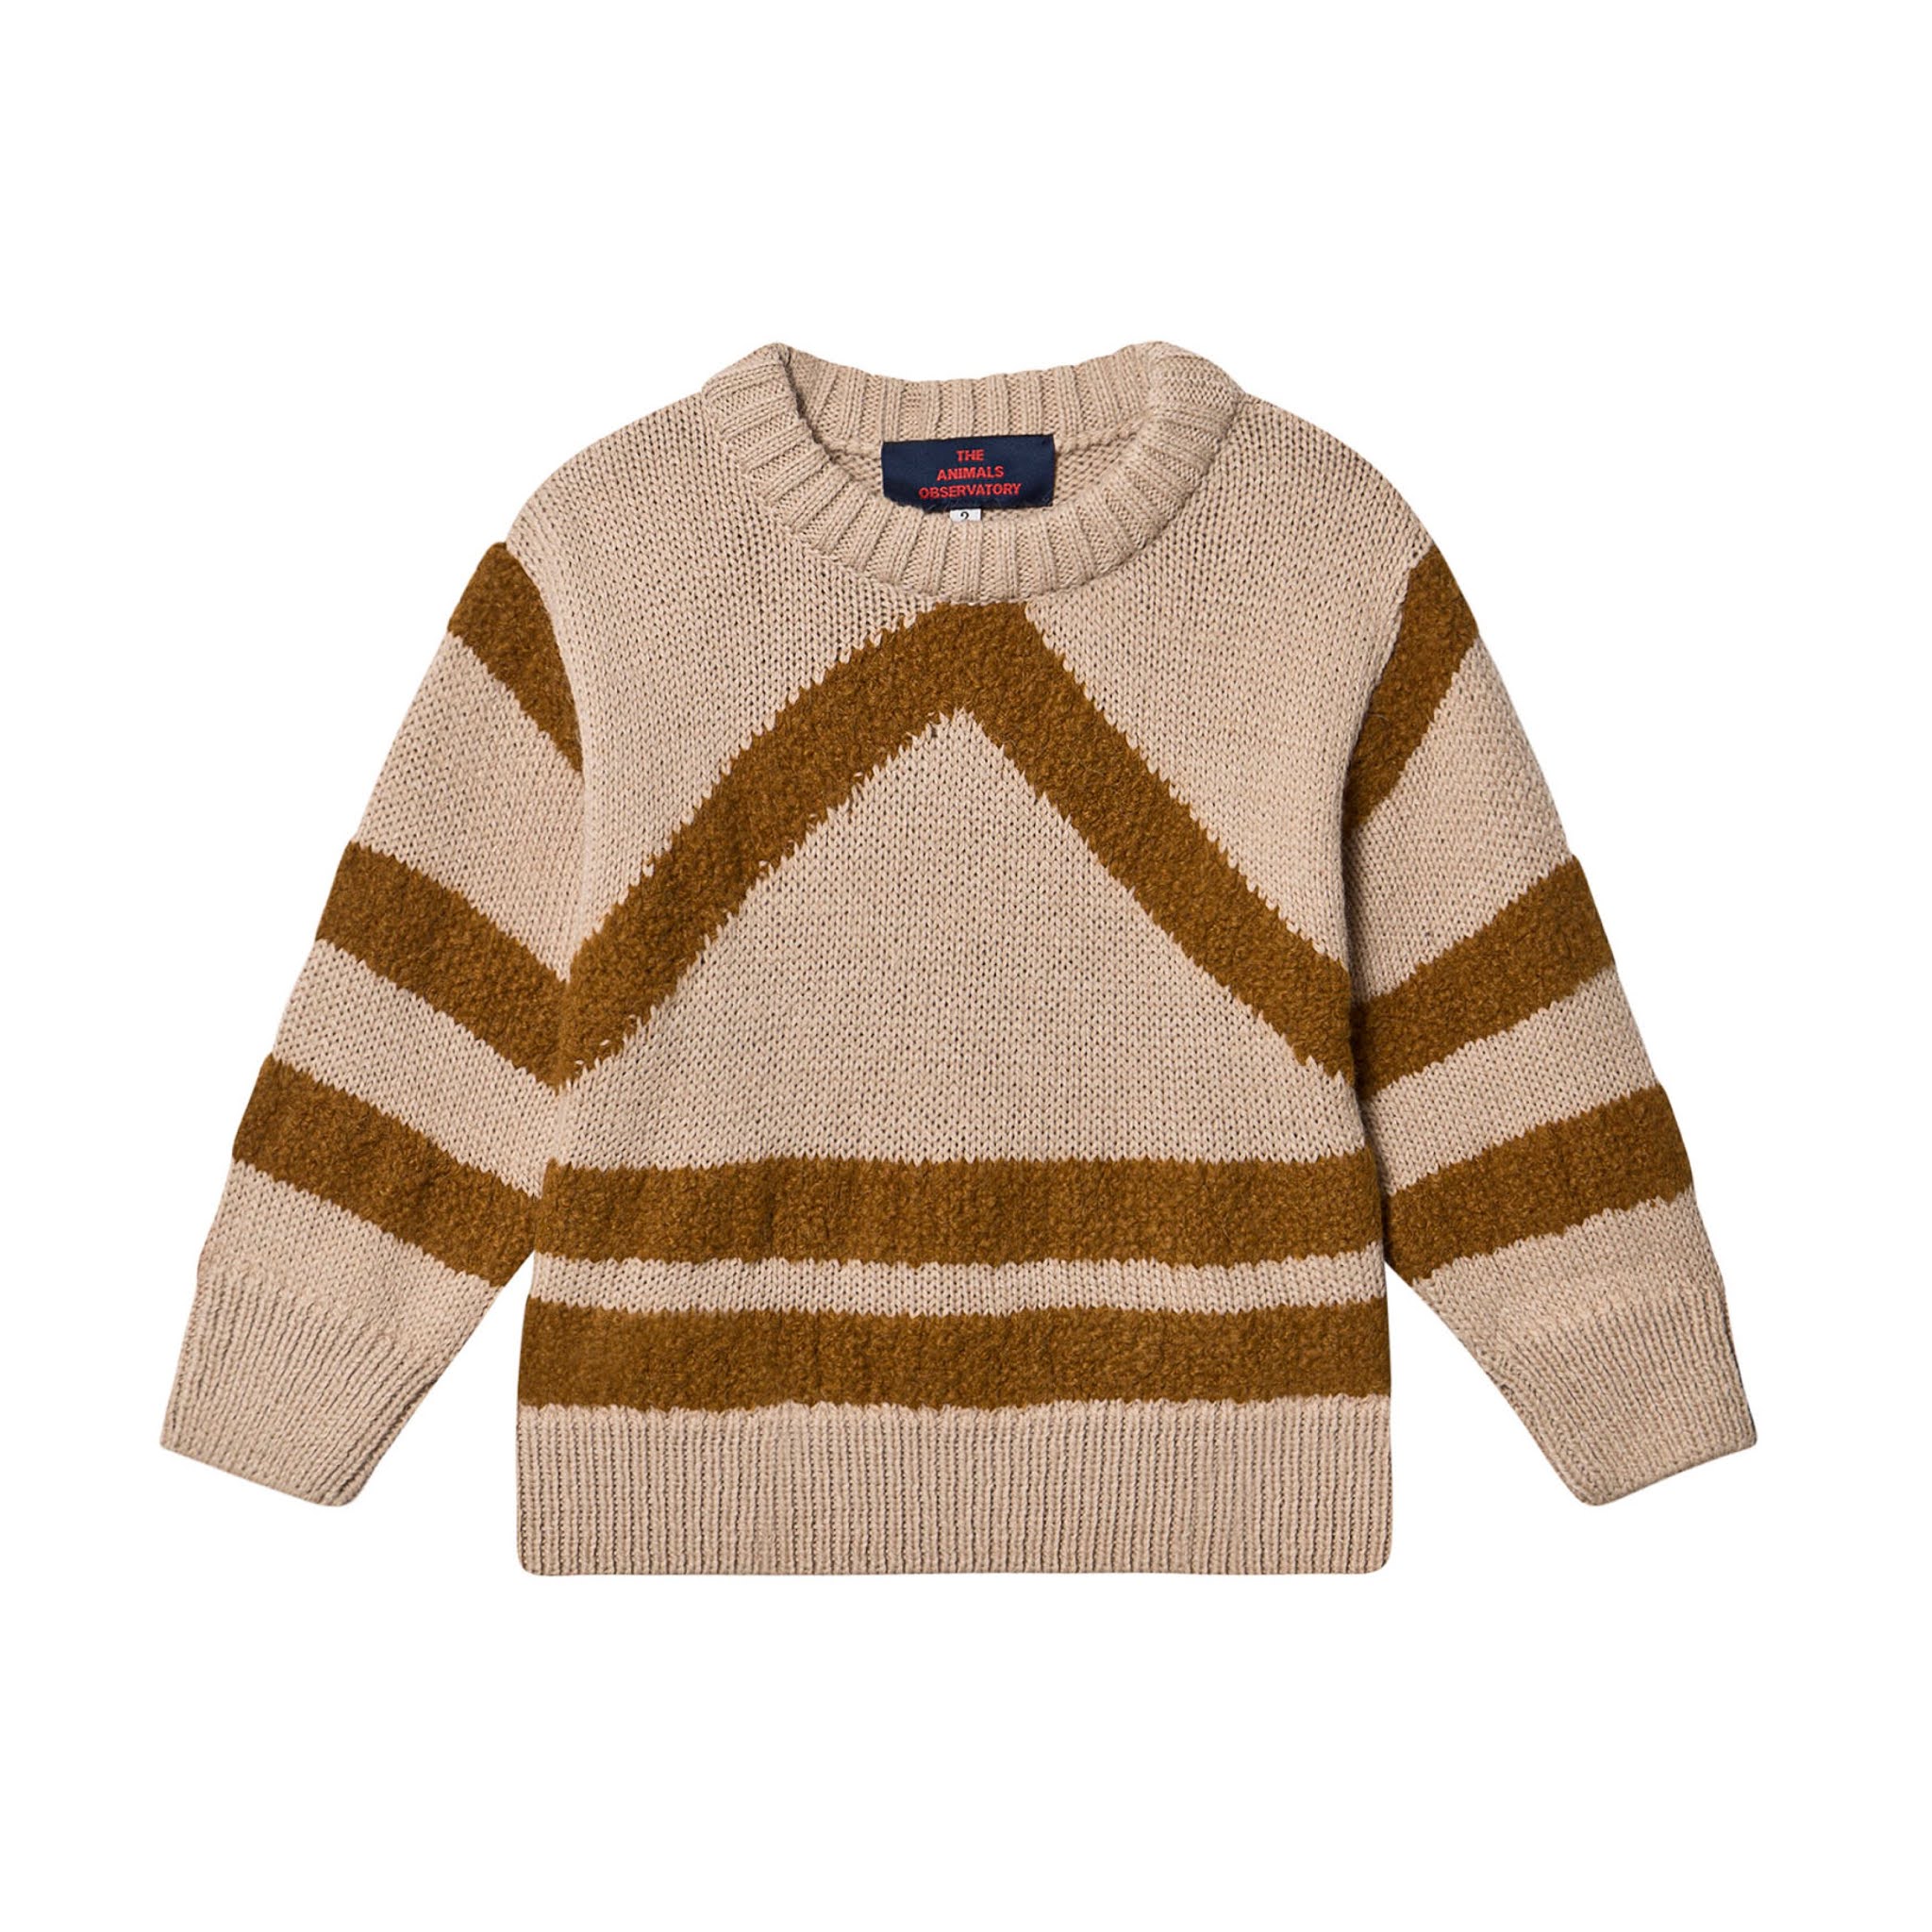 Soft Beige Kids Sweater from The Animal Observatory